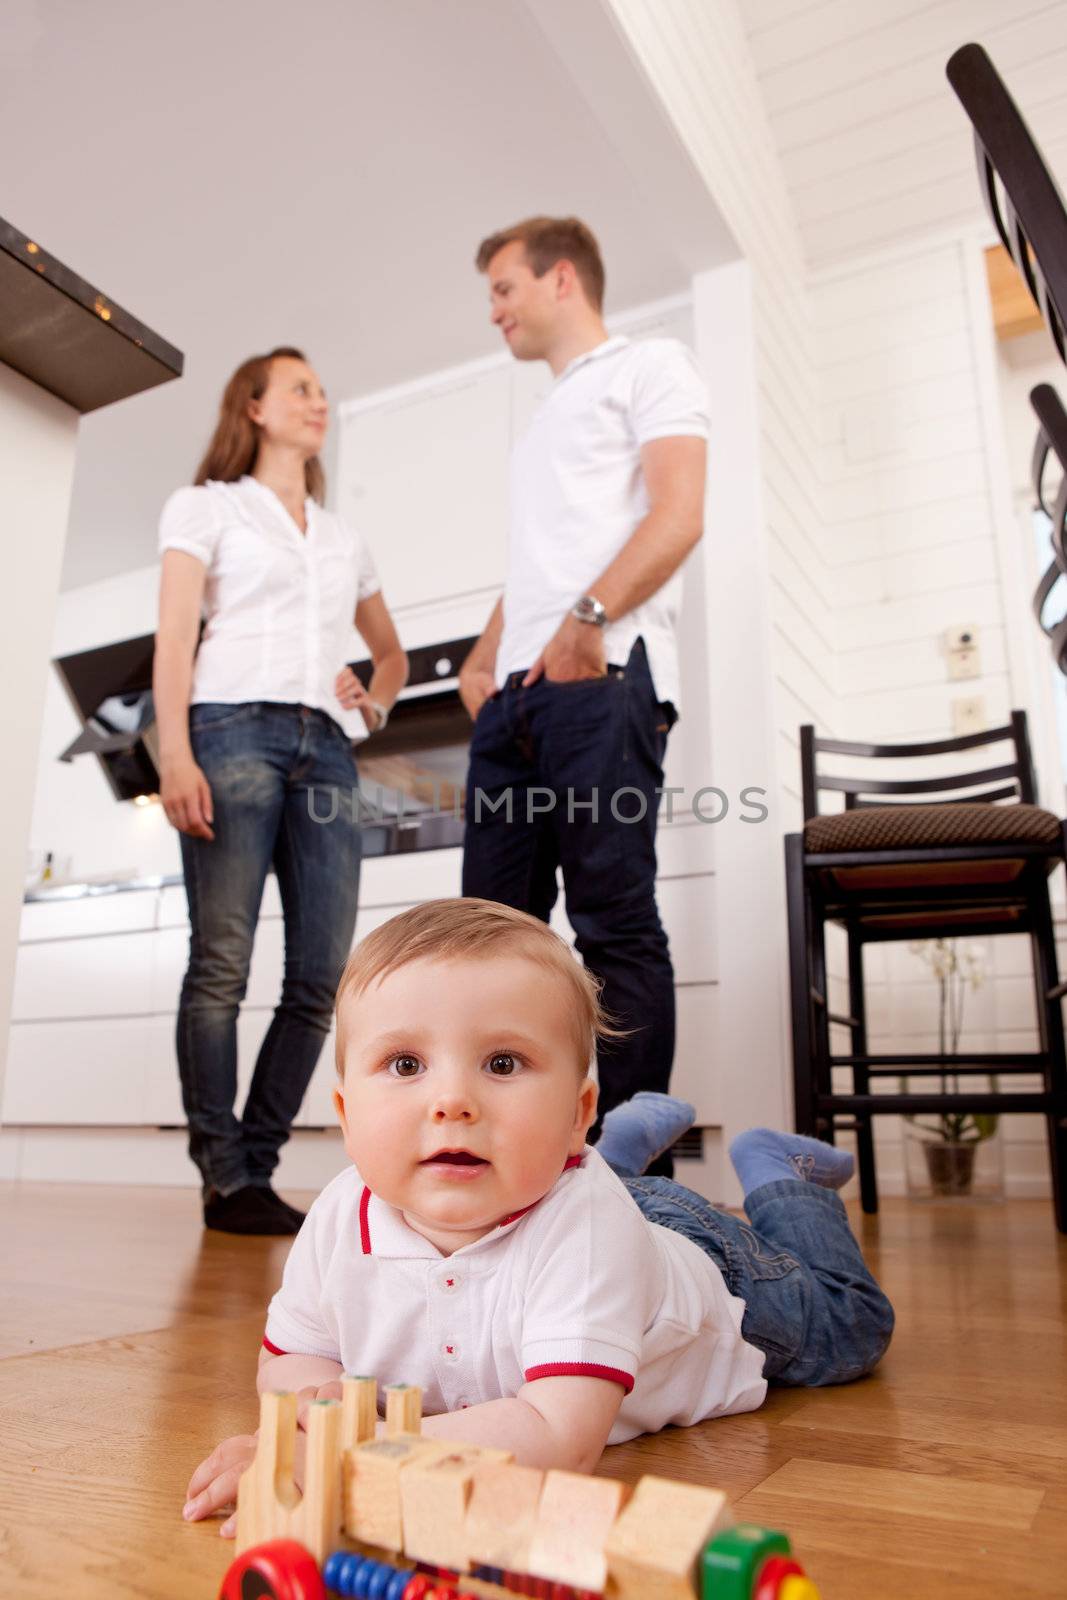 A happy child playing on kitchen floor with parents talking in the background